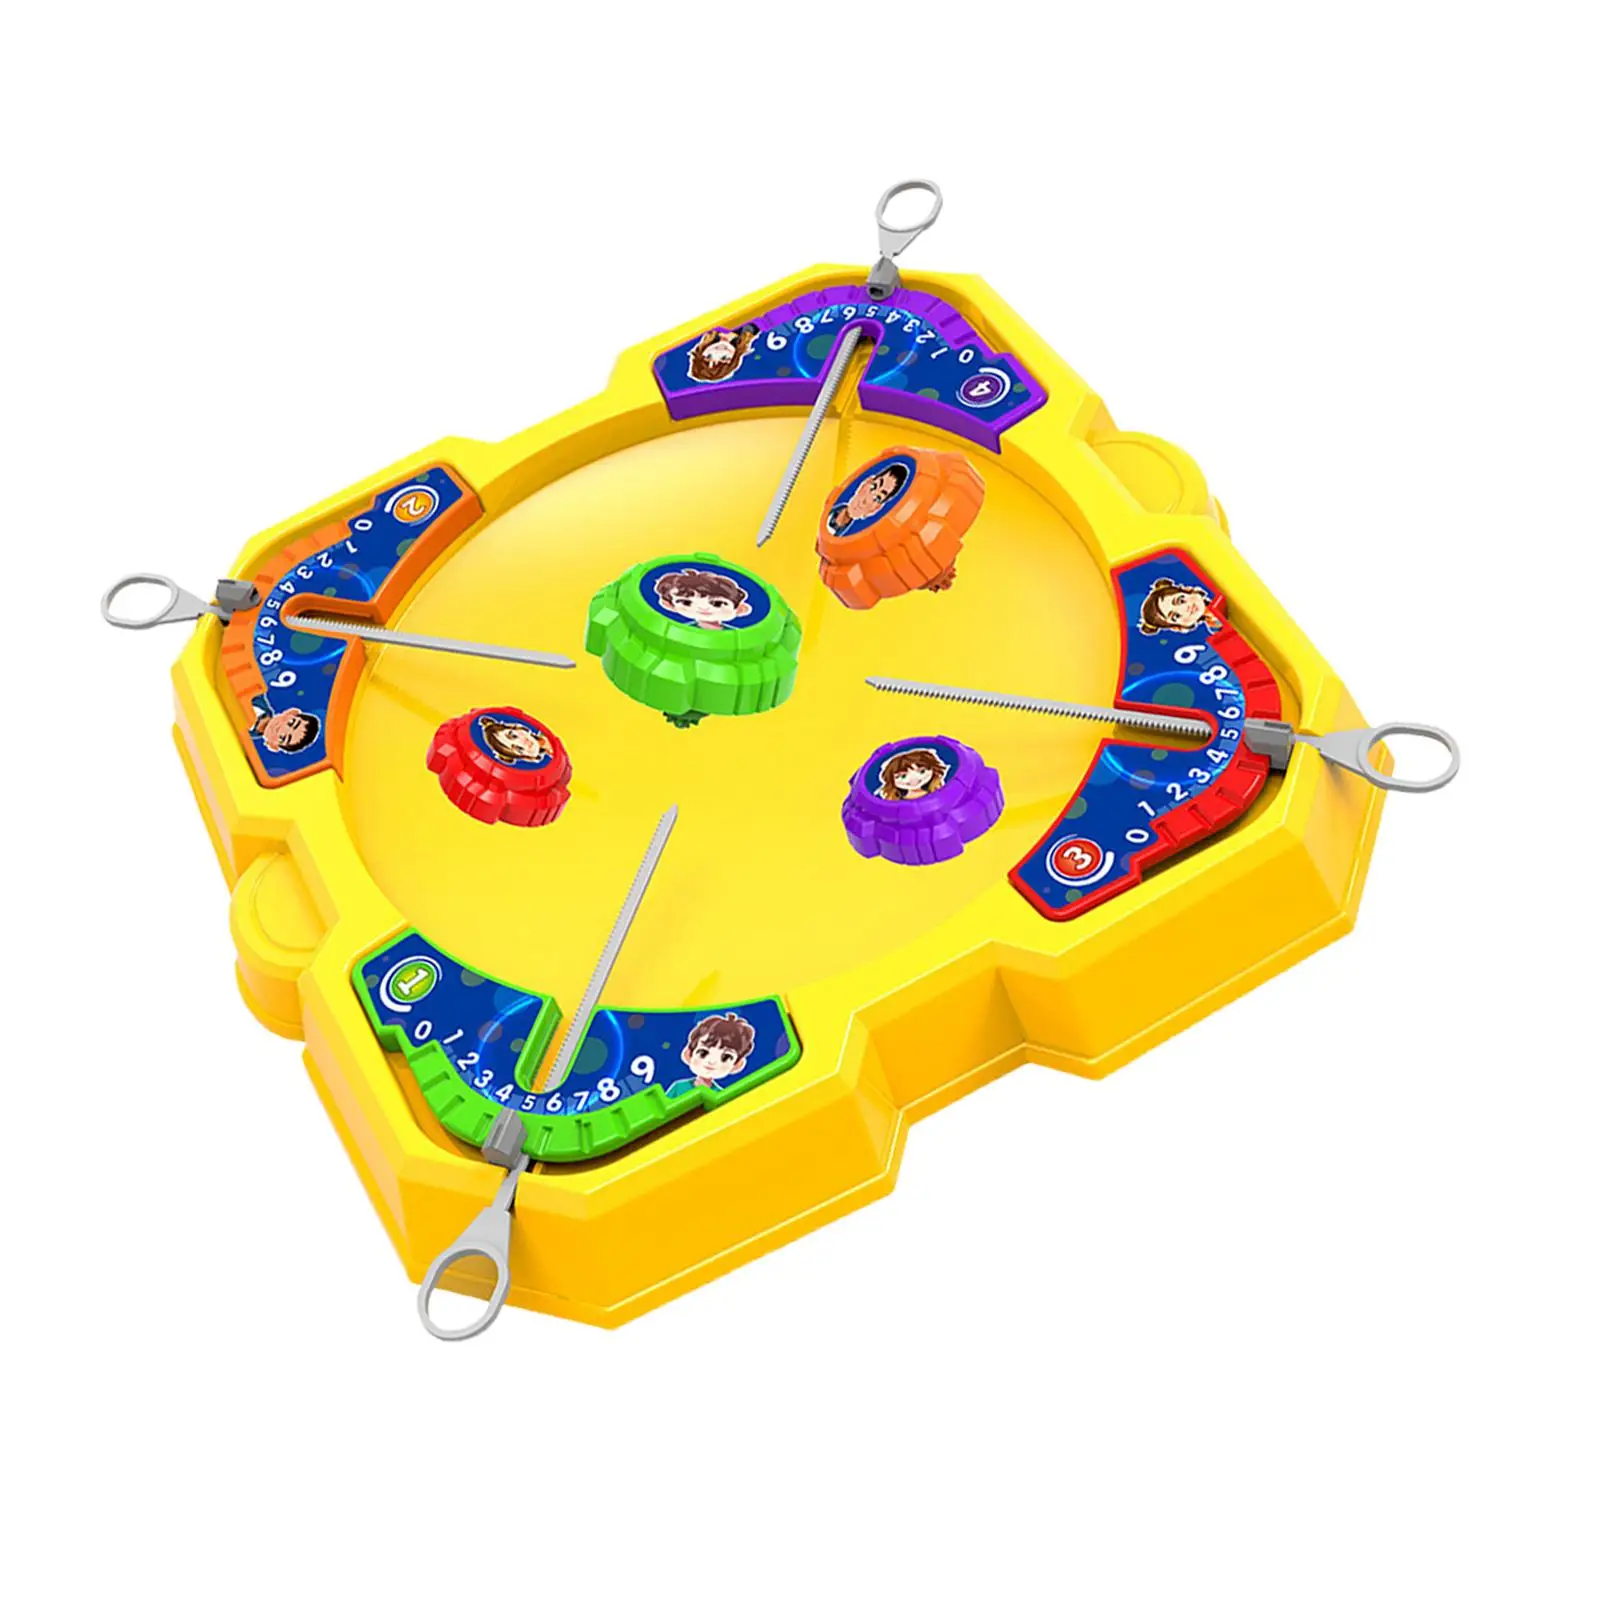 Gyro Playset Developmental Toy Drop Resistant Cute Battling Game with Launchers